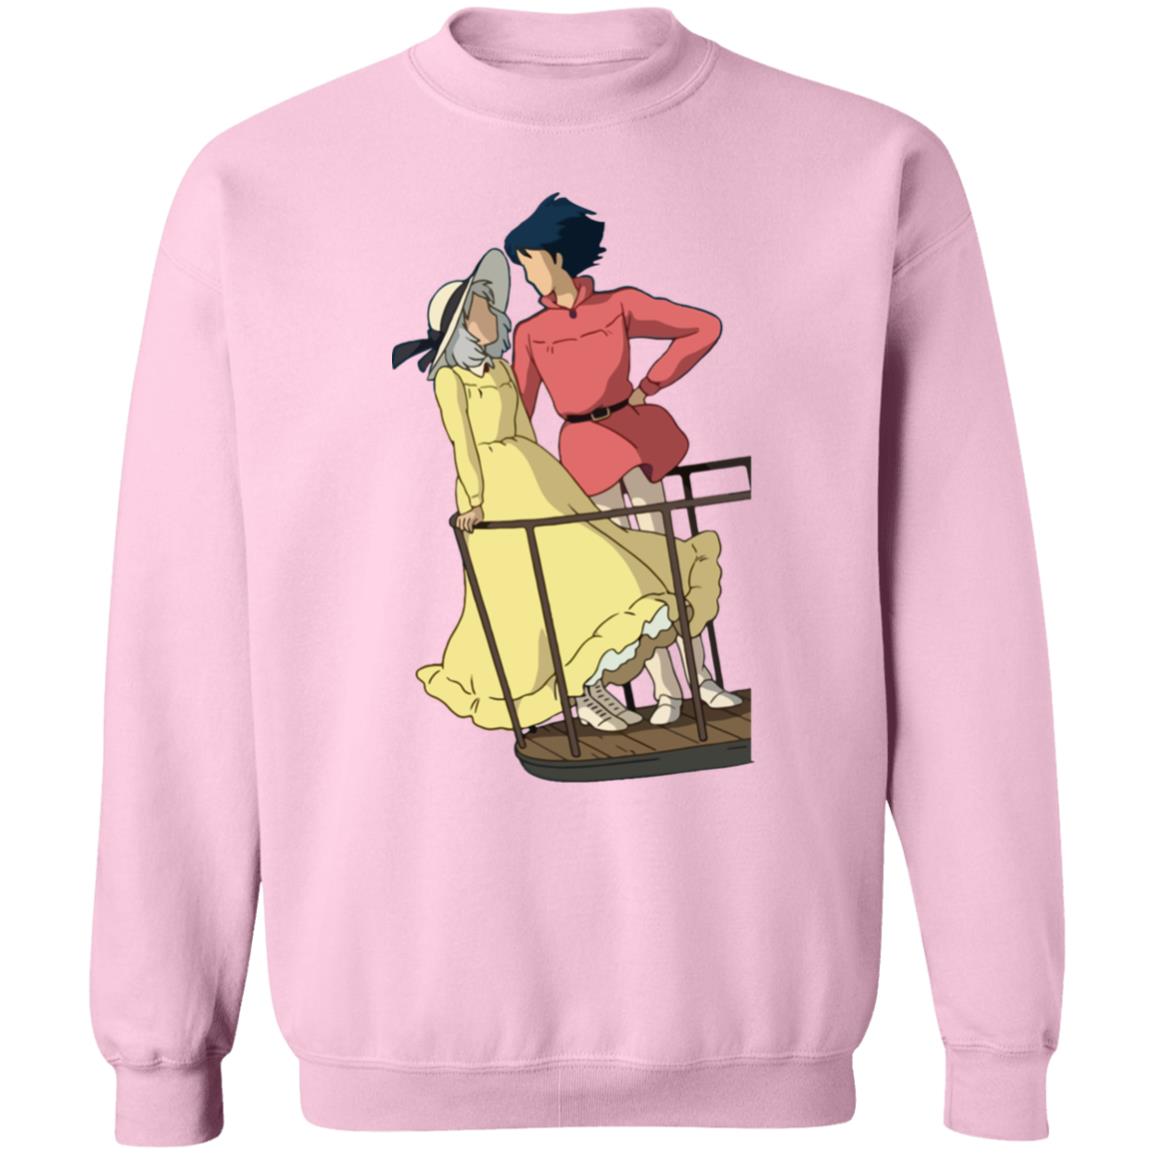 Howl’s Moving Castle – Sophie and Howl Gazing at Each other Sweatshirt